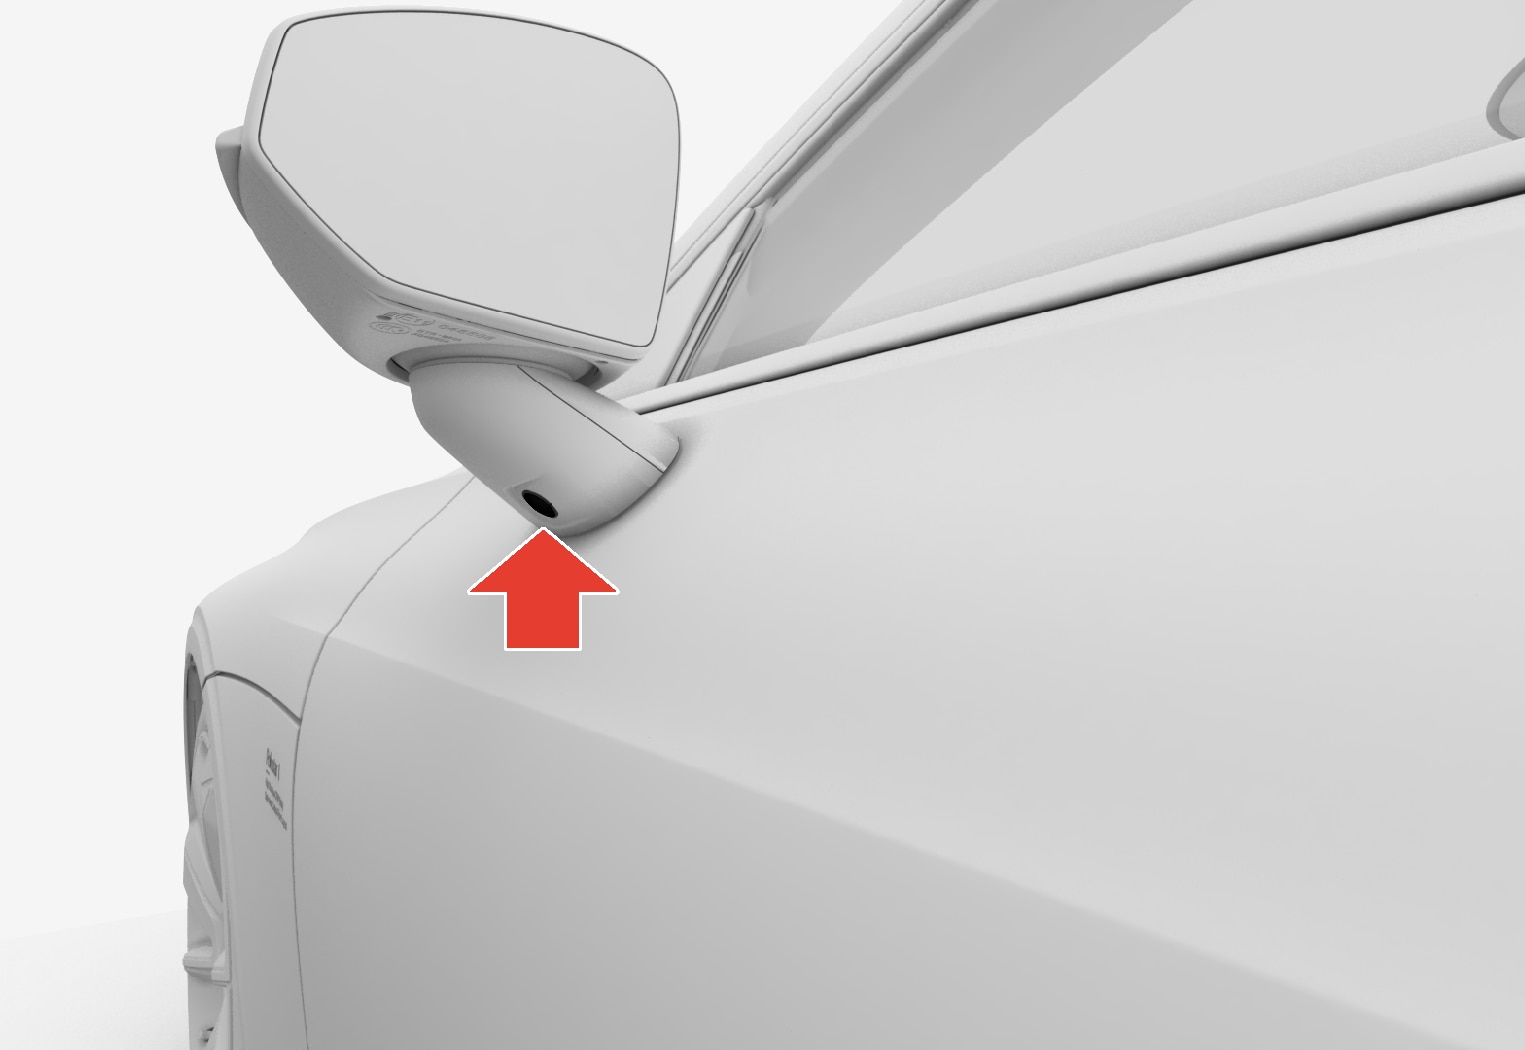 PS-1926-Park Assist Camera placement outer side mirrors